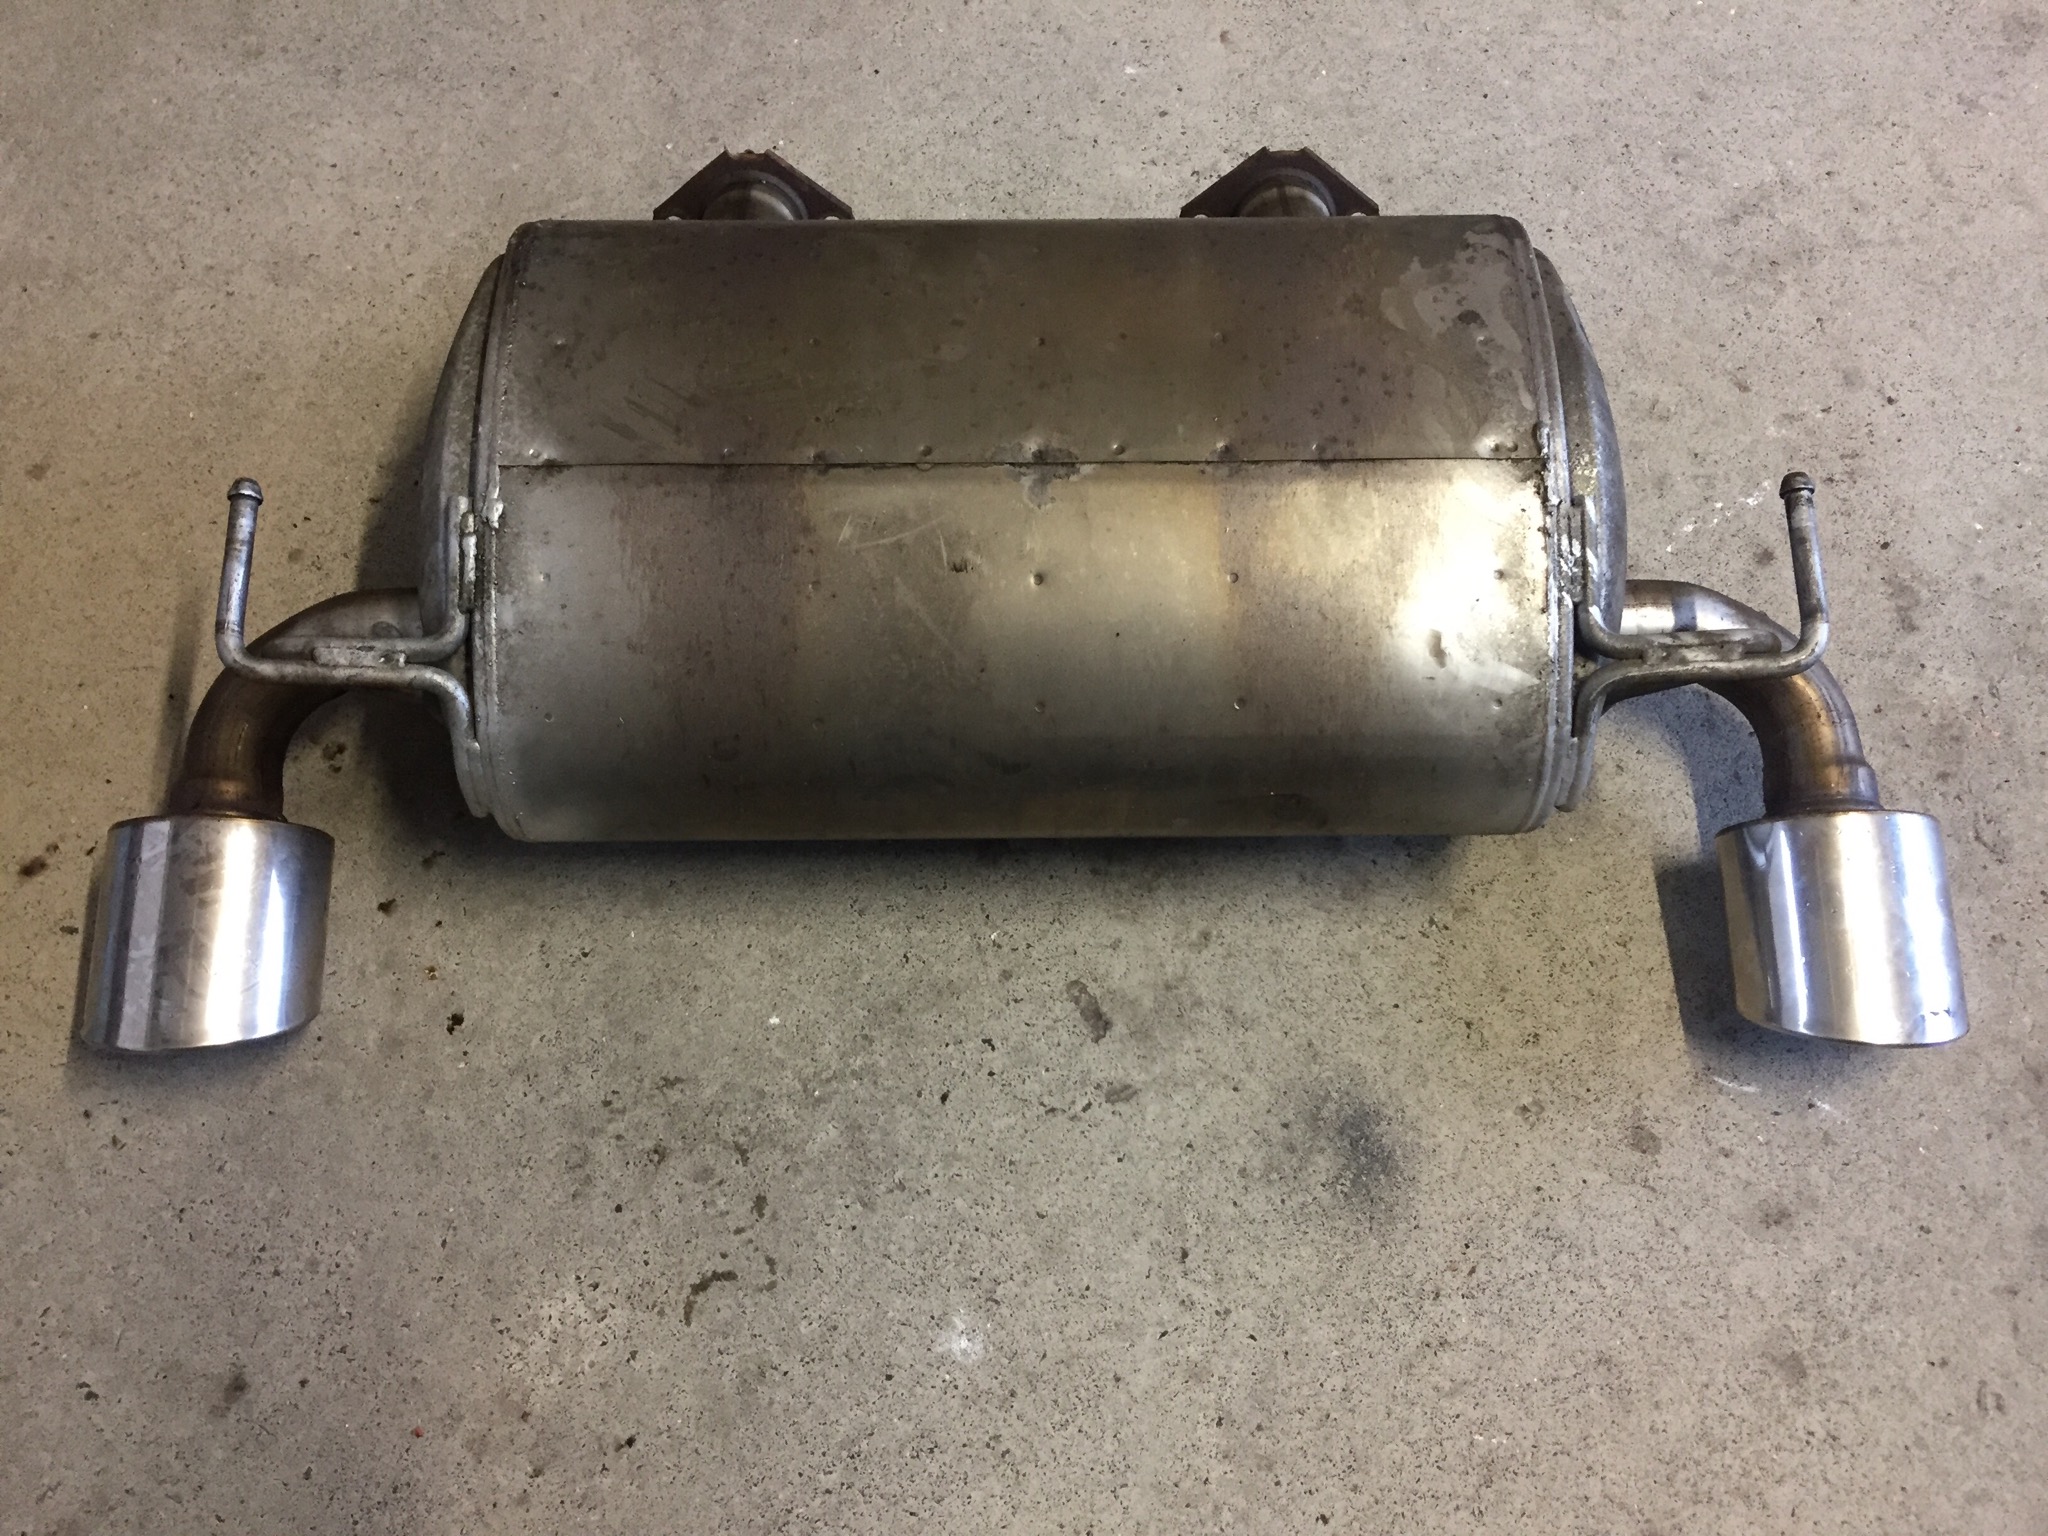 2009 - 2016 Nissan 370z Parts! MUST Sell!